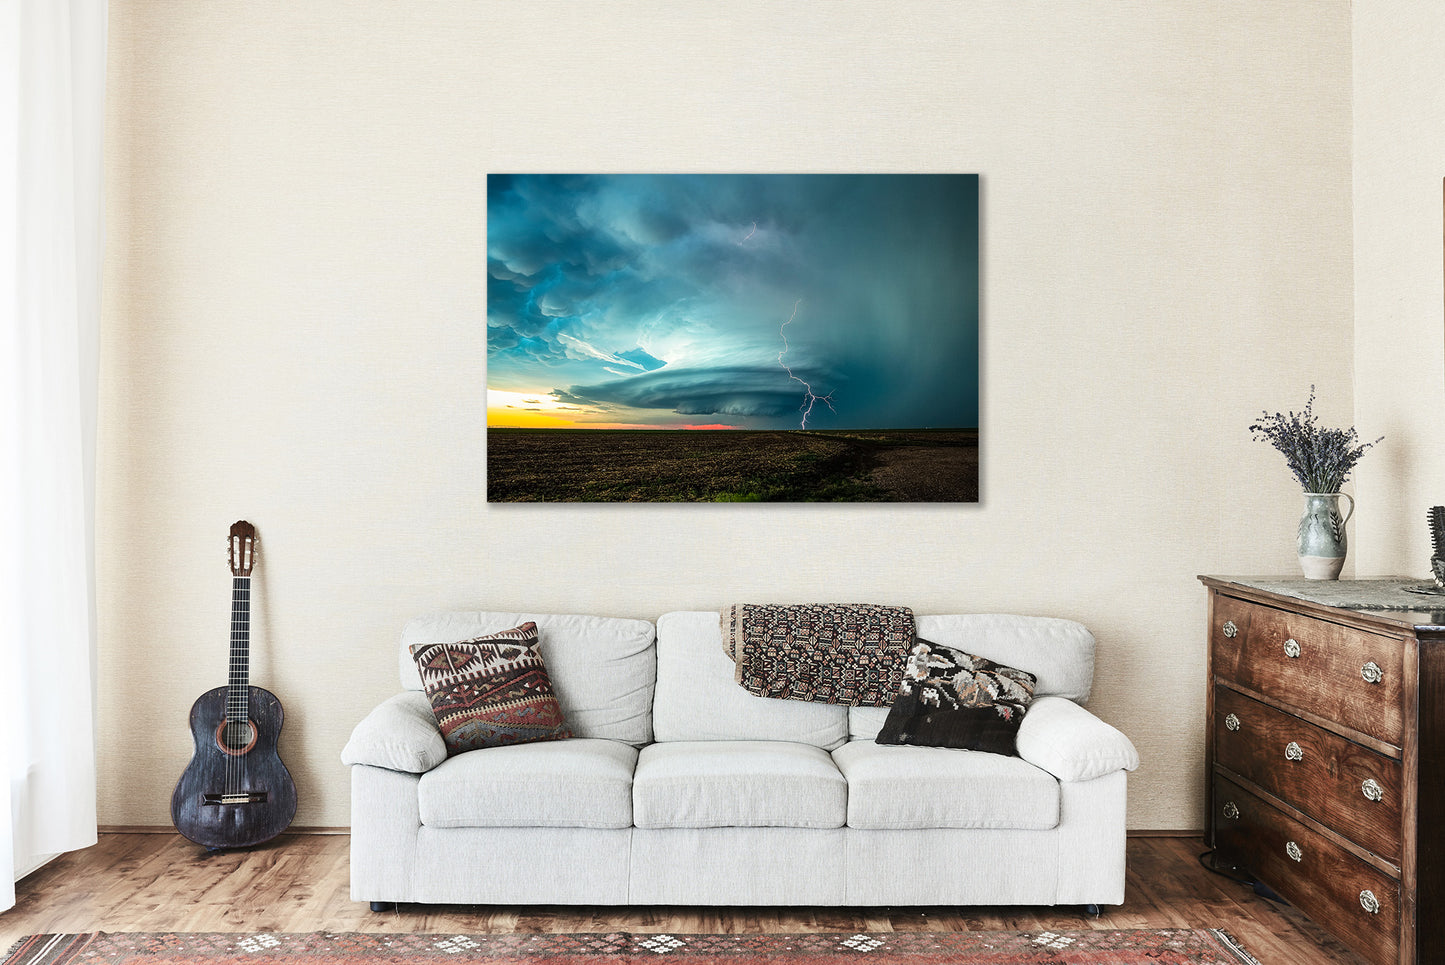 Storm Metal Print (Ready to Hang) Photo on Aluminum of Supercell Thunderstorm with Lightning Bolt at Sunset on Stormy Spring Evening in Kansas Weather Wall Art Nature Decor